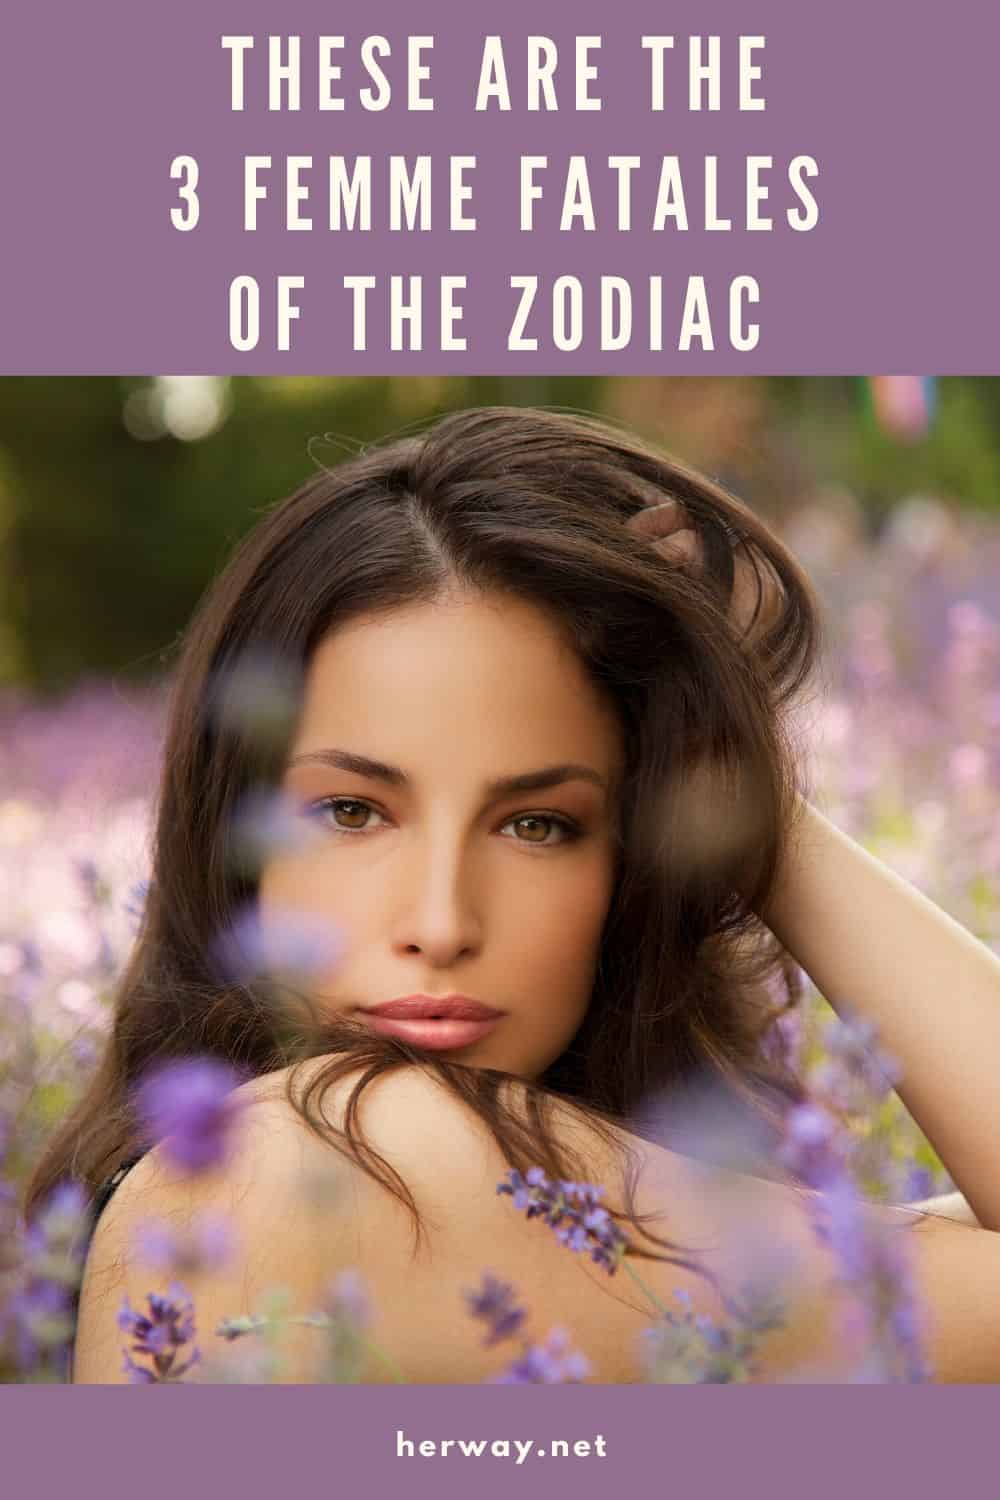 THESE ARE THE 3 FEMME FATALES OF THE ZODIAC